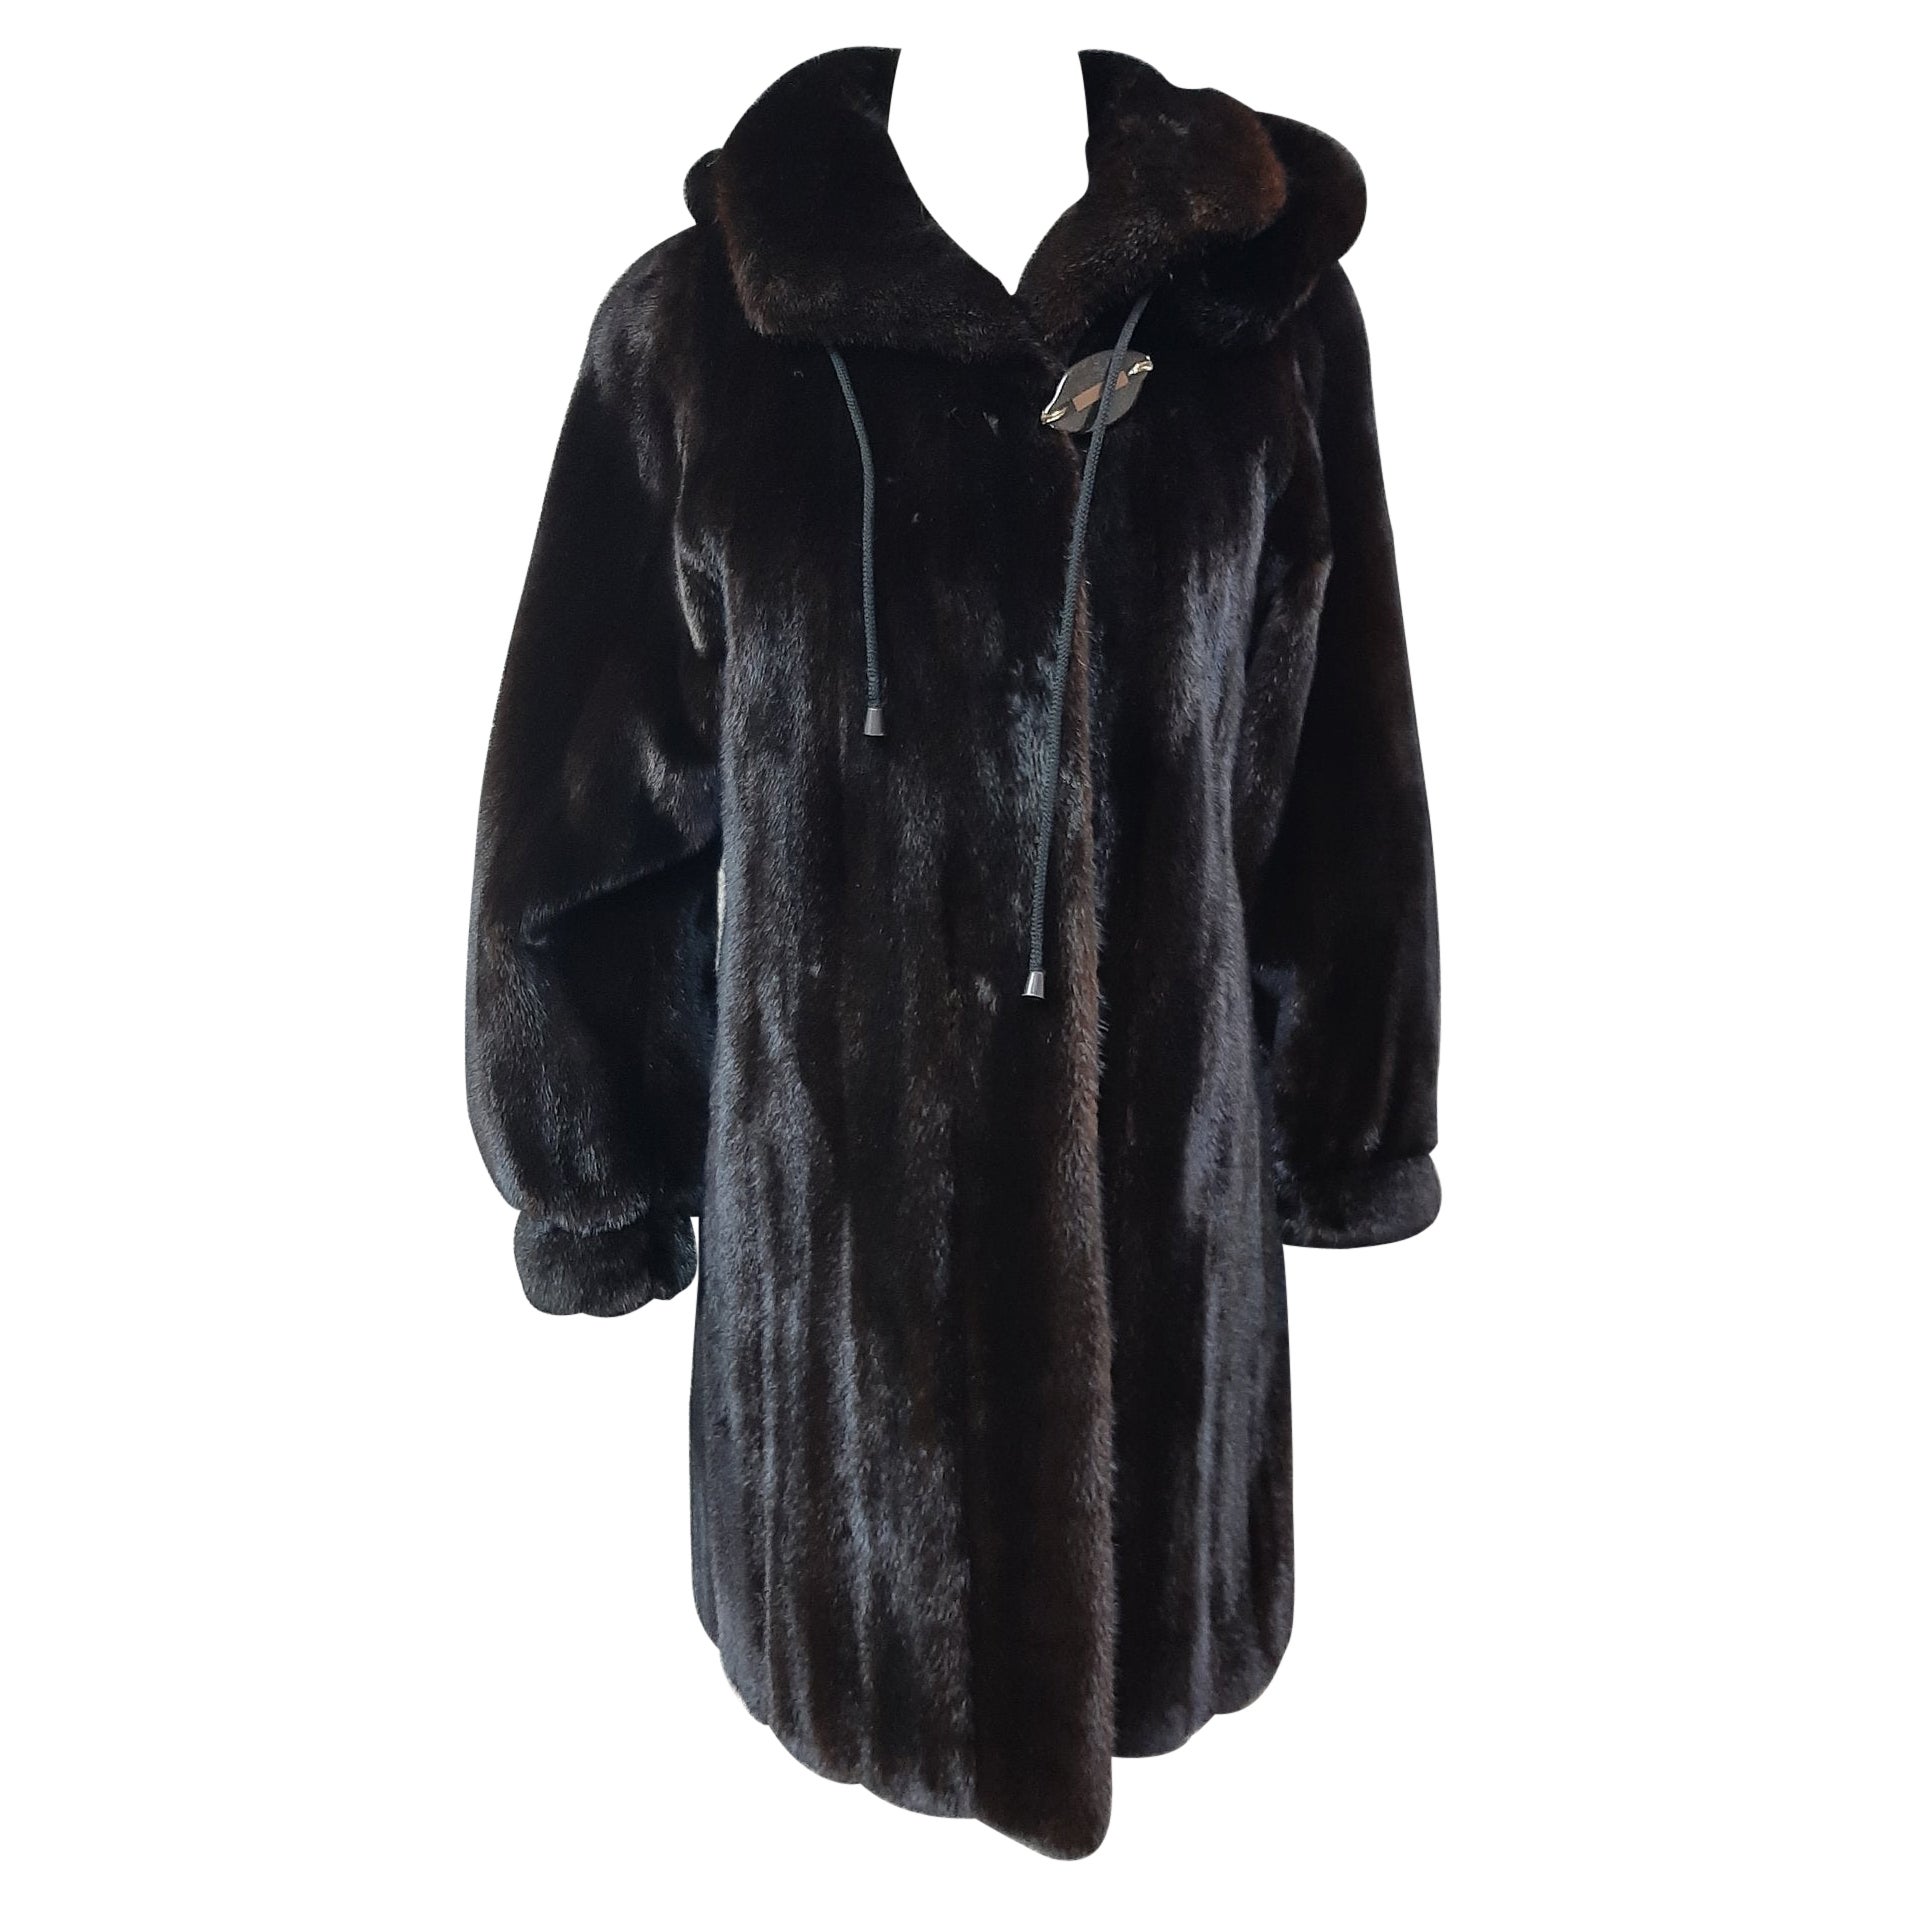 Unused ranch mink fur coat with a hood size 8 For Sale